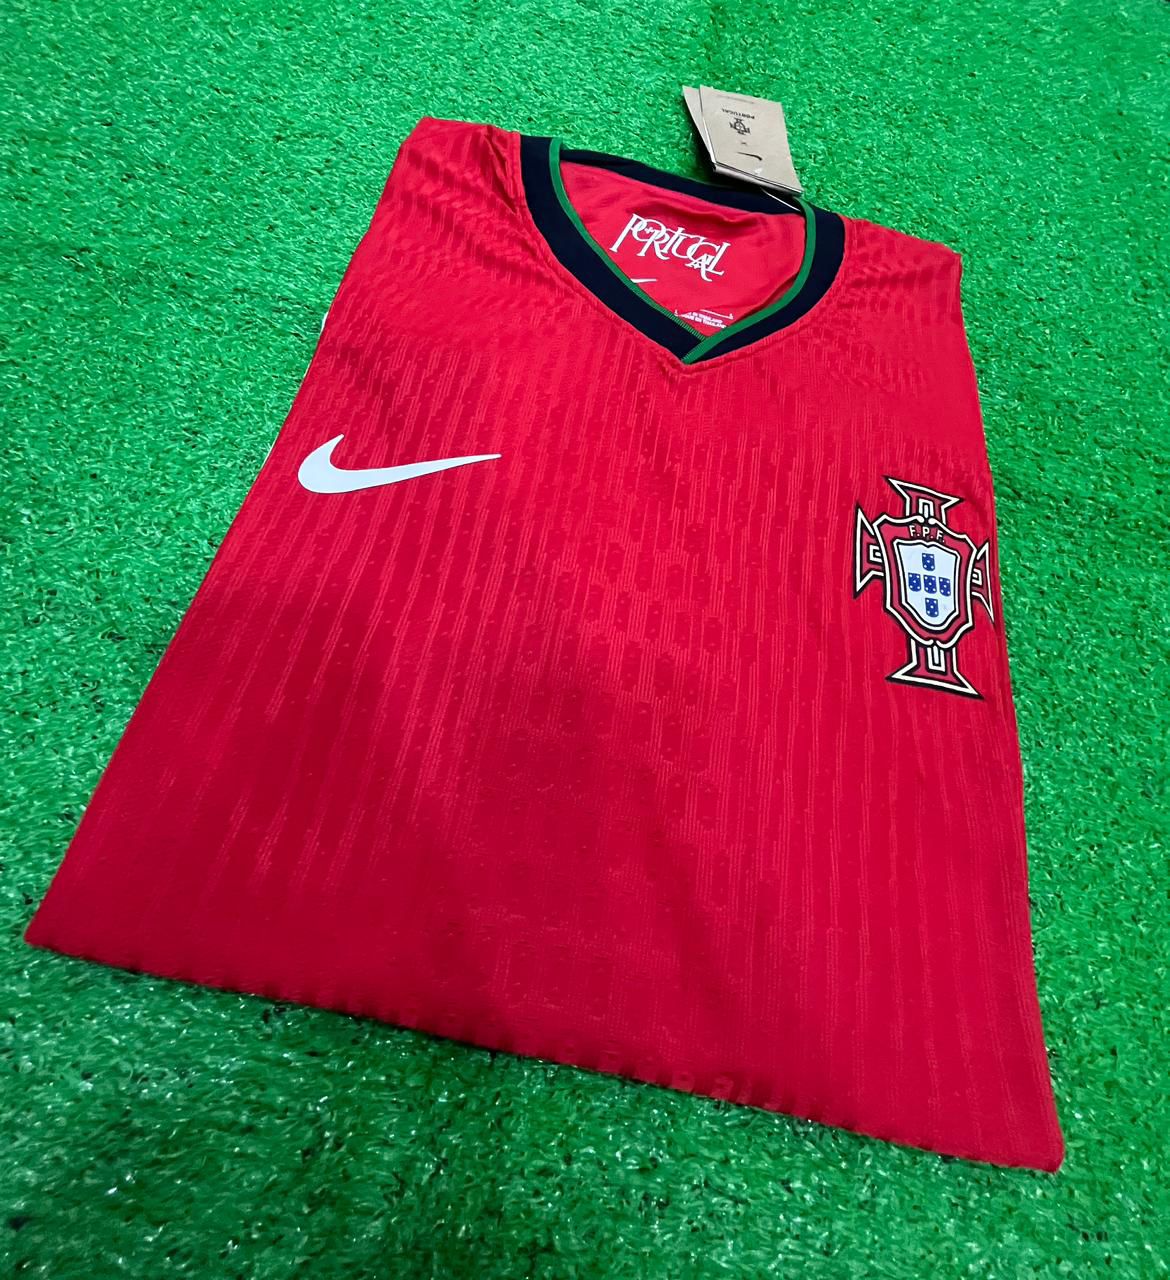 PORTUGAL HOME JERSEY PLAYER VERSION QUALITY